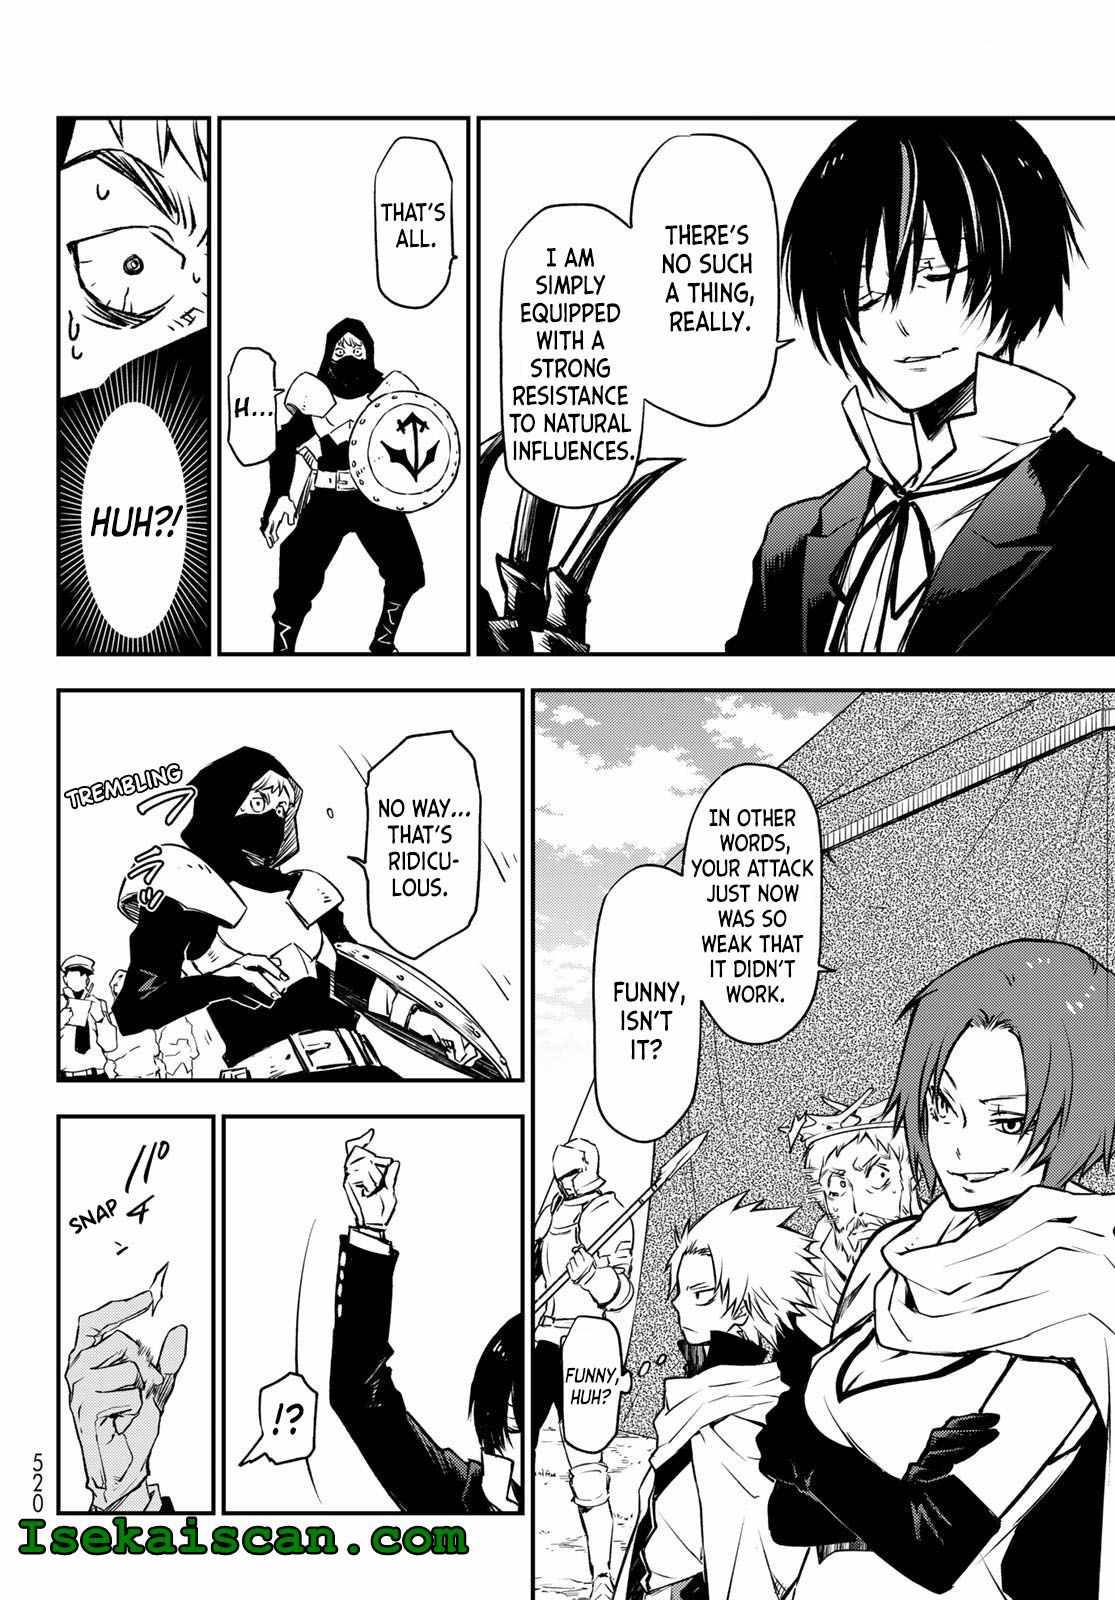 That Time I Got Reincarnated as a Slime, Chapter 94